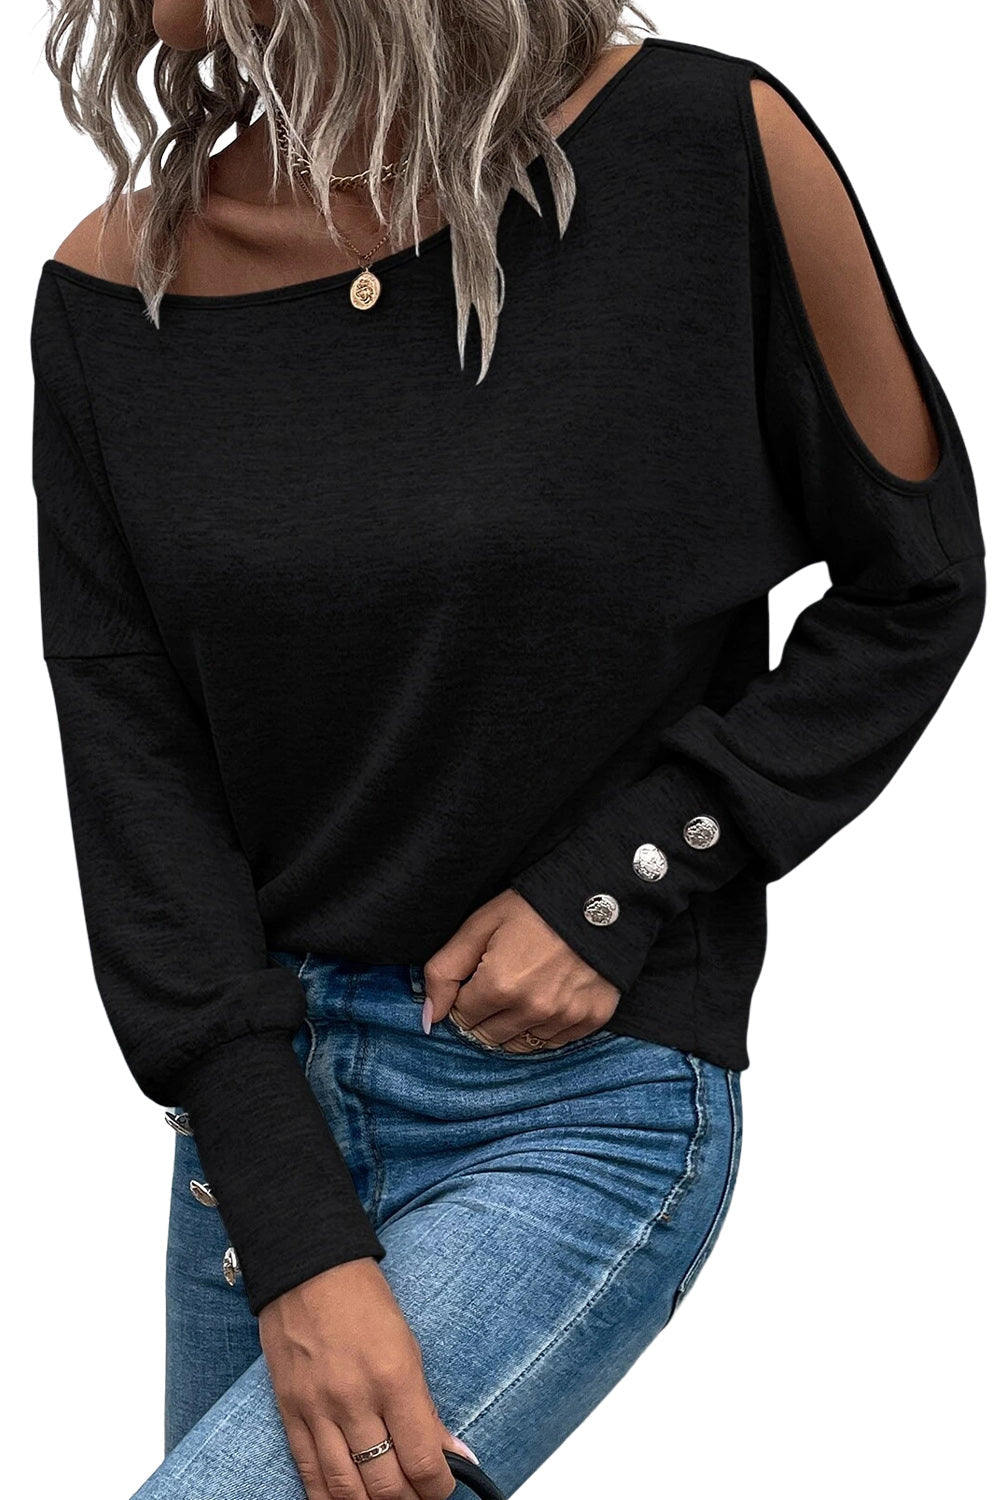 Black Asymmetrical Cut Out Buttoned Long Sleeve Top-3